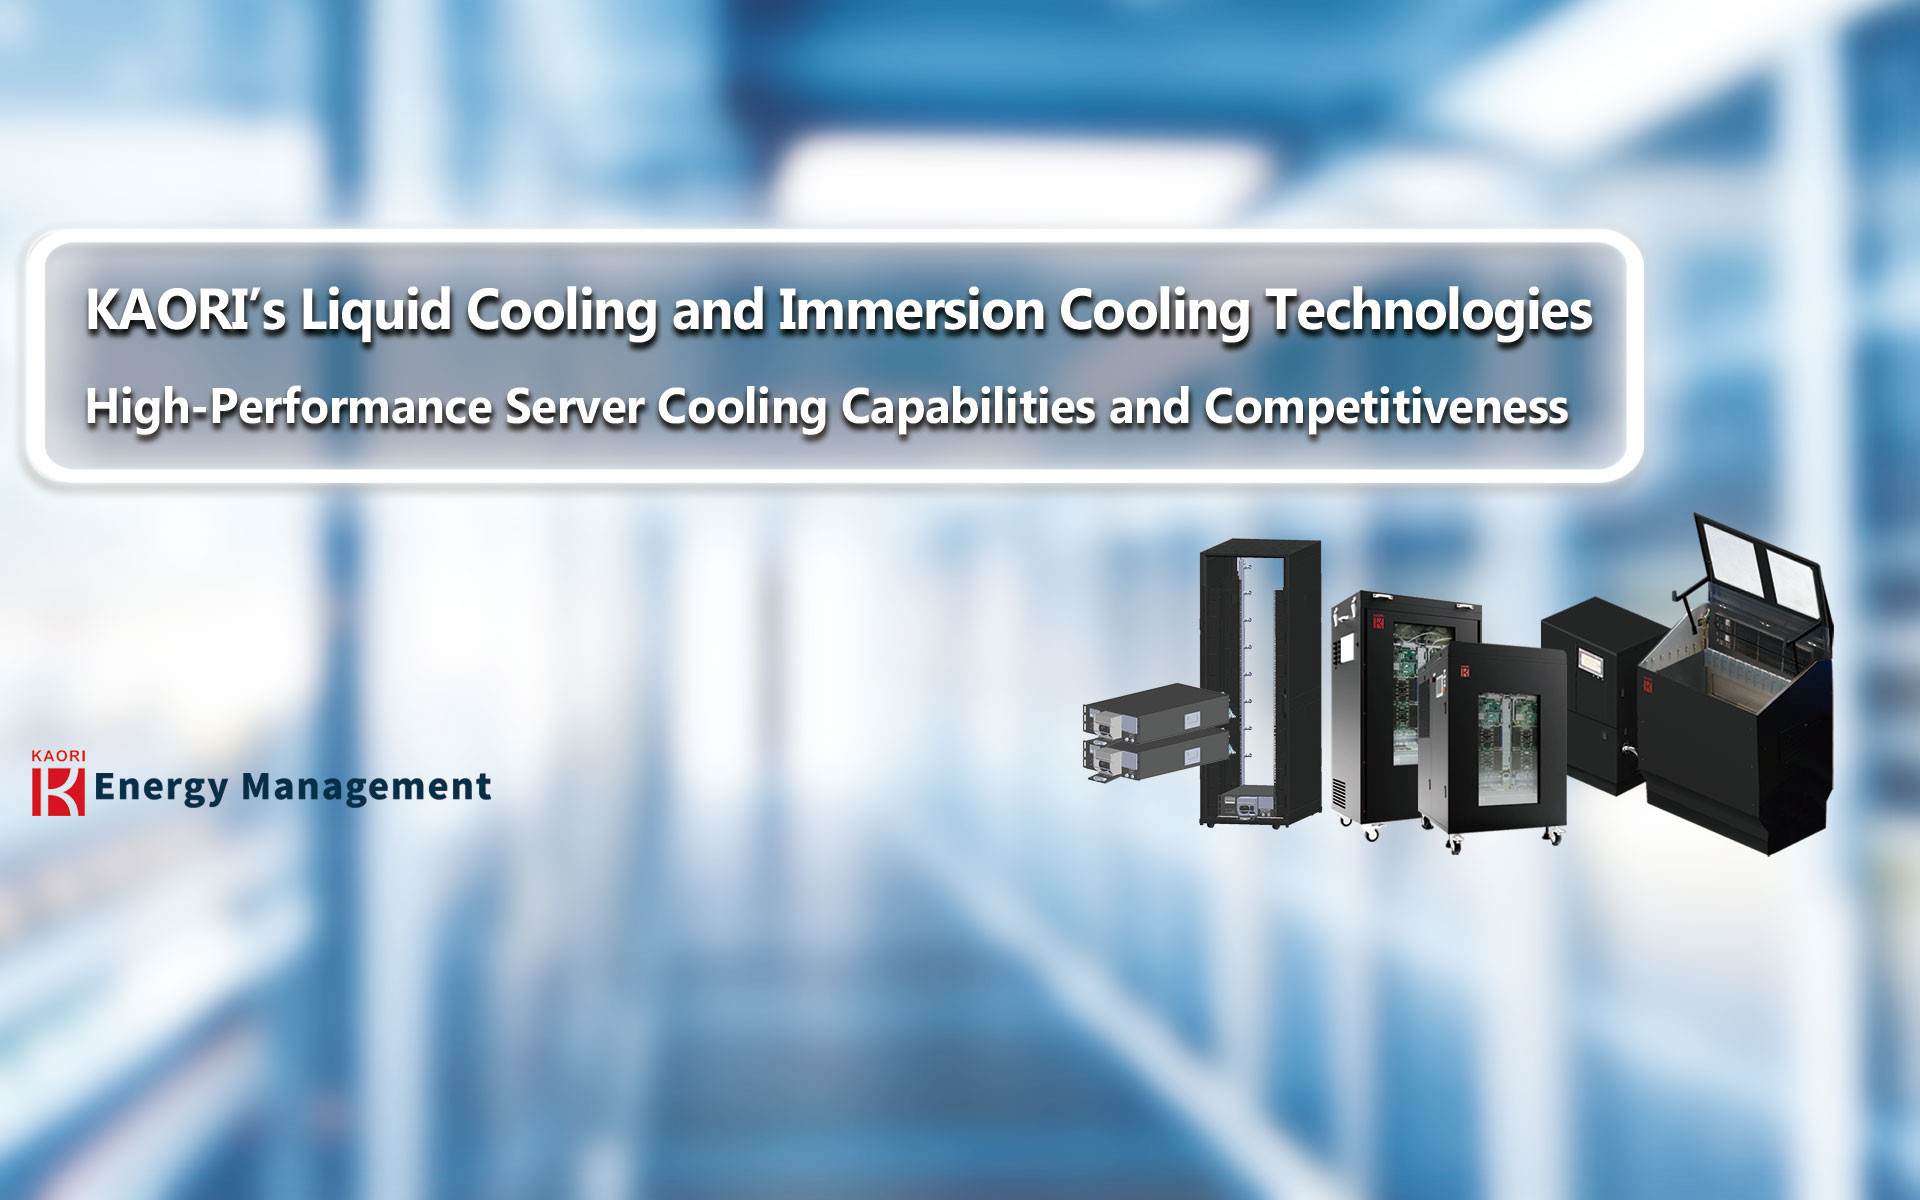  KAORI’s Liquid Cooling and Immersion Cooling Technologies: High-Performance Server Cooling Capabilities and Competitiveness 